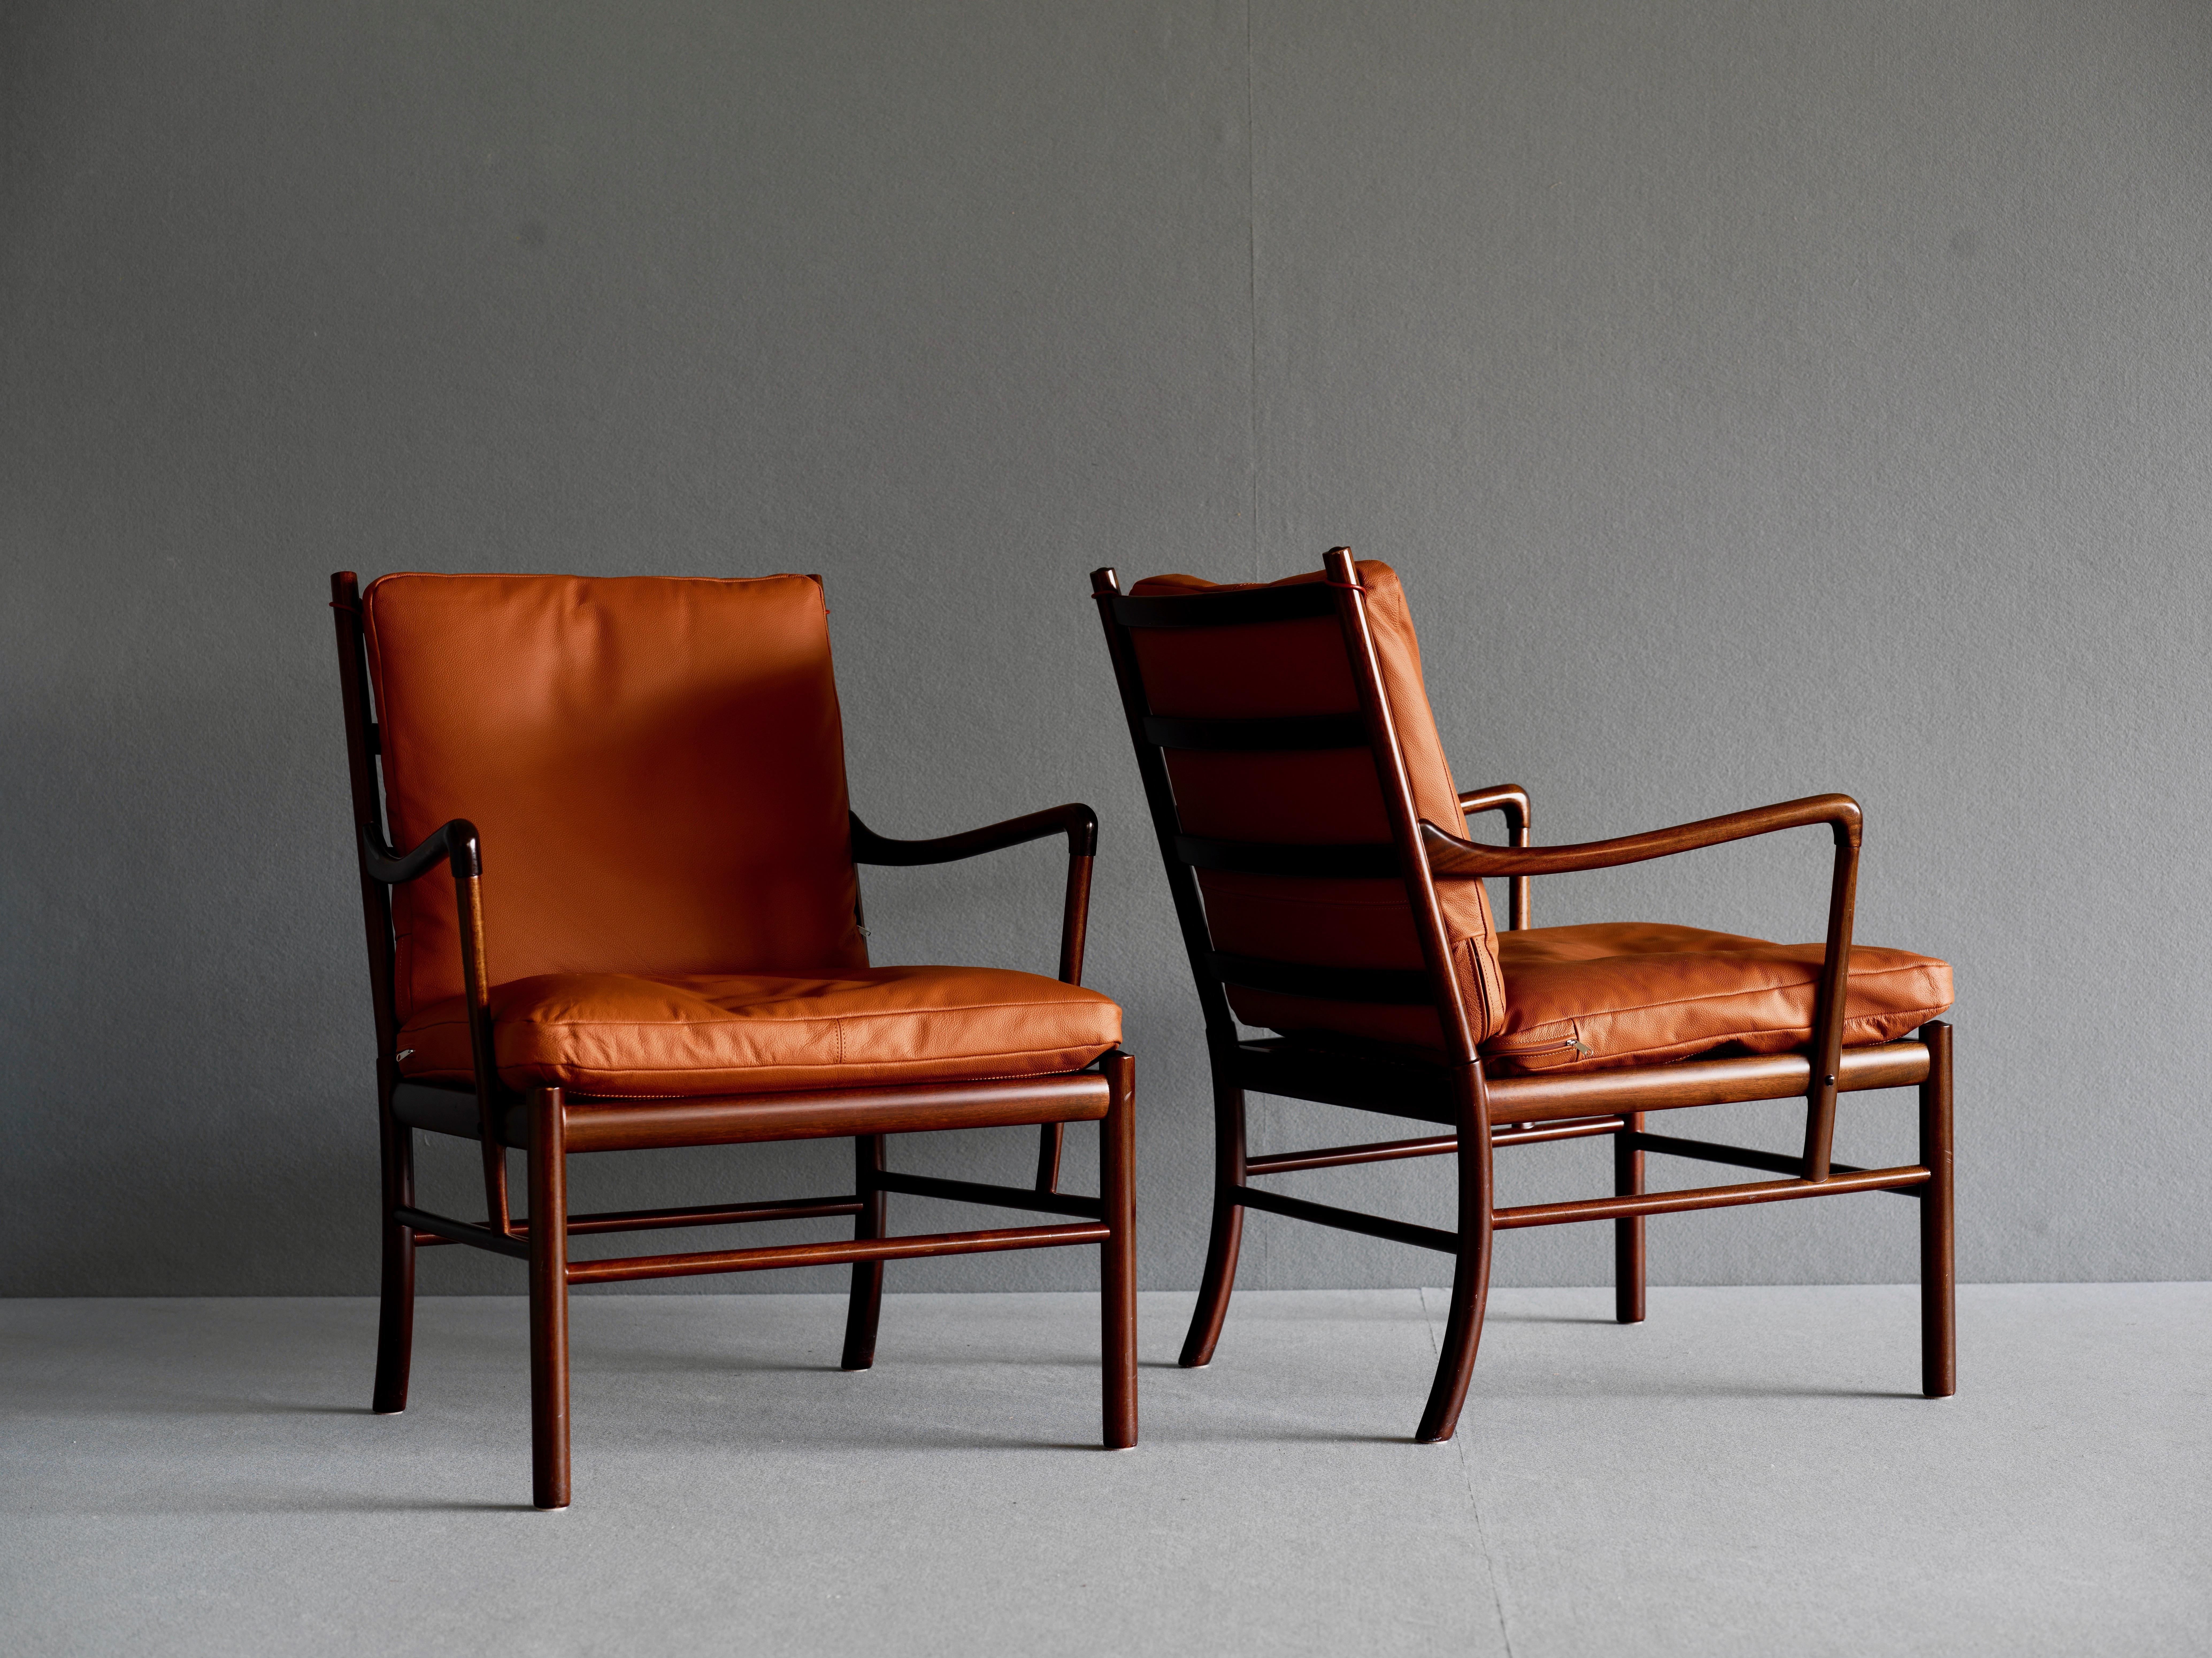 Pair of “Colonial” armchairs by Ole Wanscher for P Jepperson. They have a mahogany frame and a woven rattan cane seat. The cushions on the seat and back are upholstered in cognac leather. These chairs are elegant and refined in expression featuring